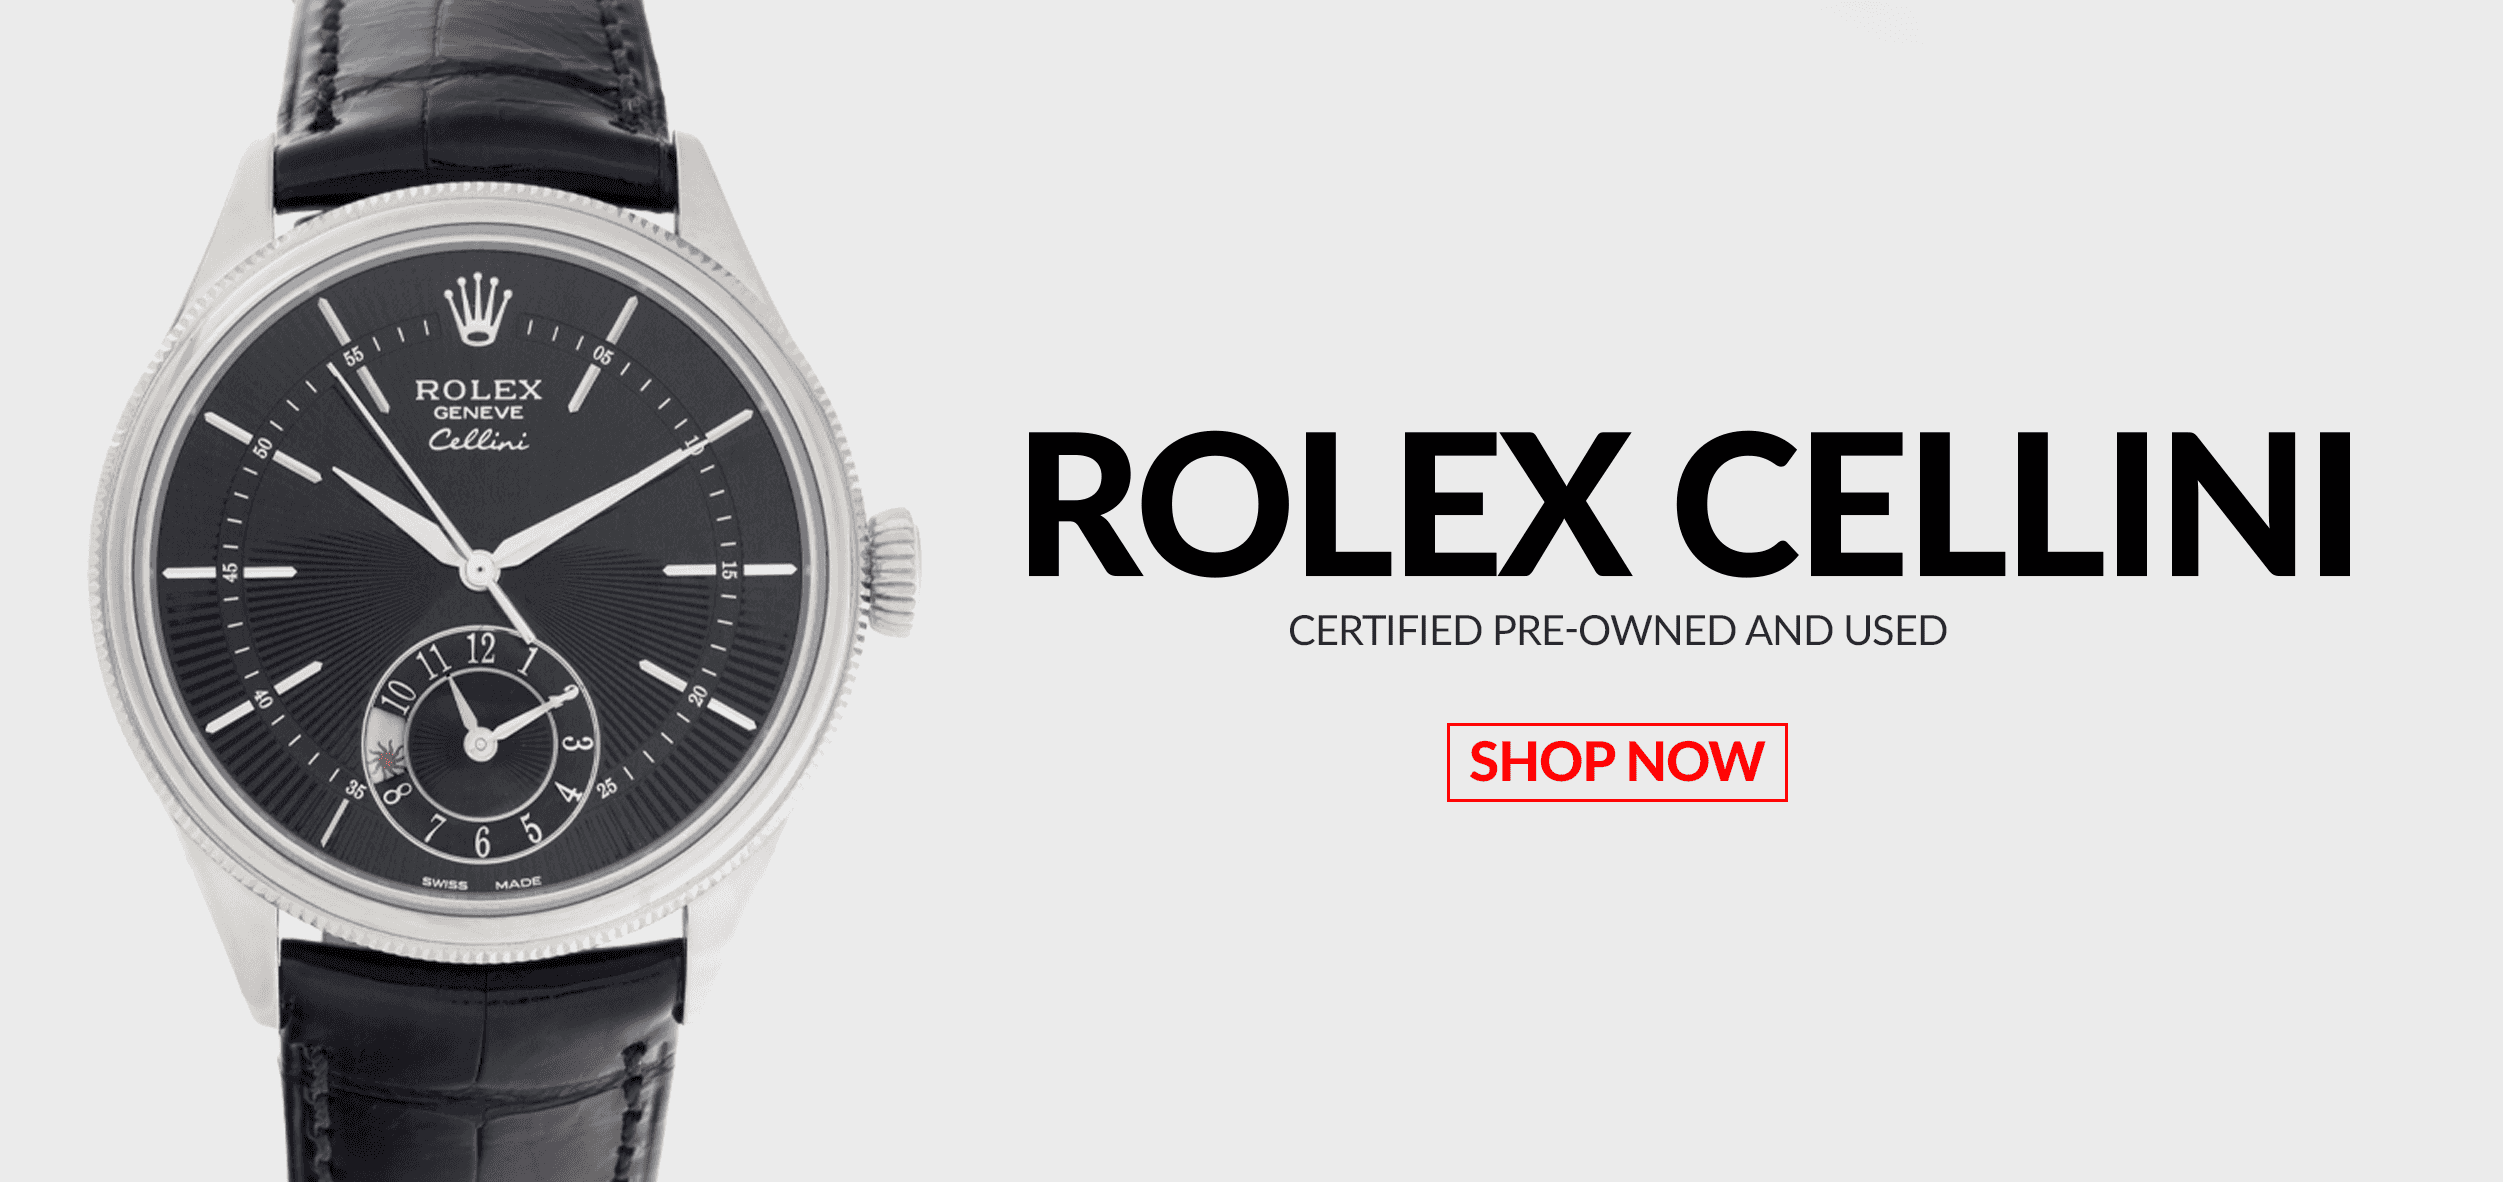 Pre-Owned Certified Used Rolex Cellini Watches Header